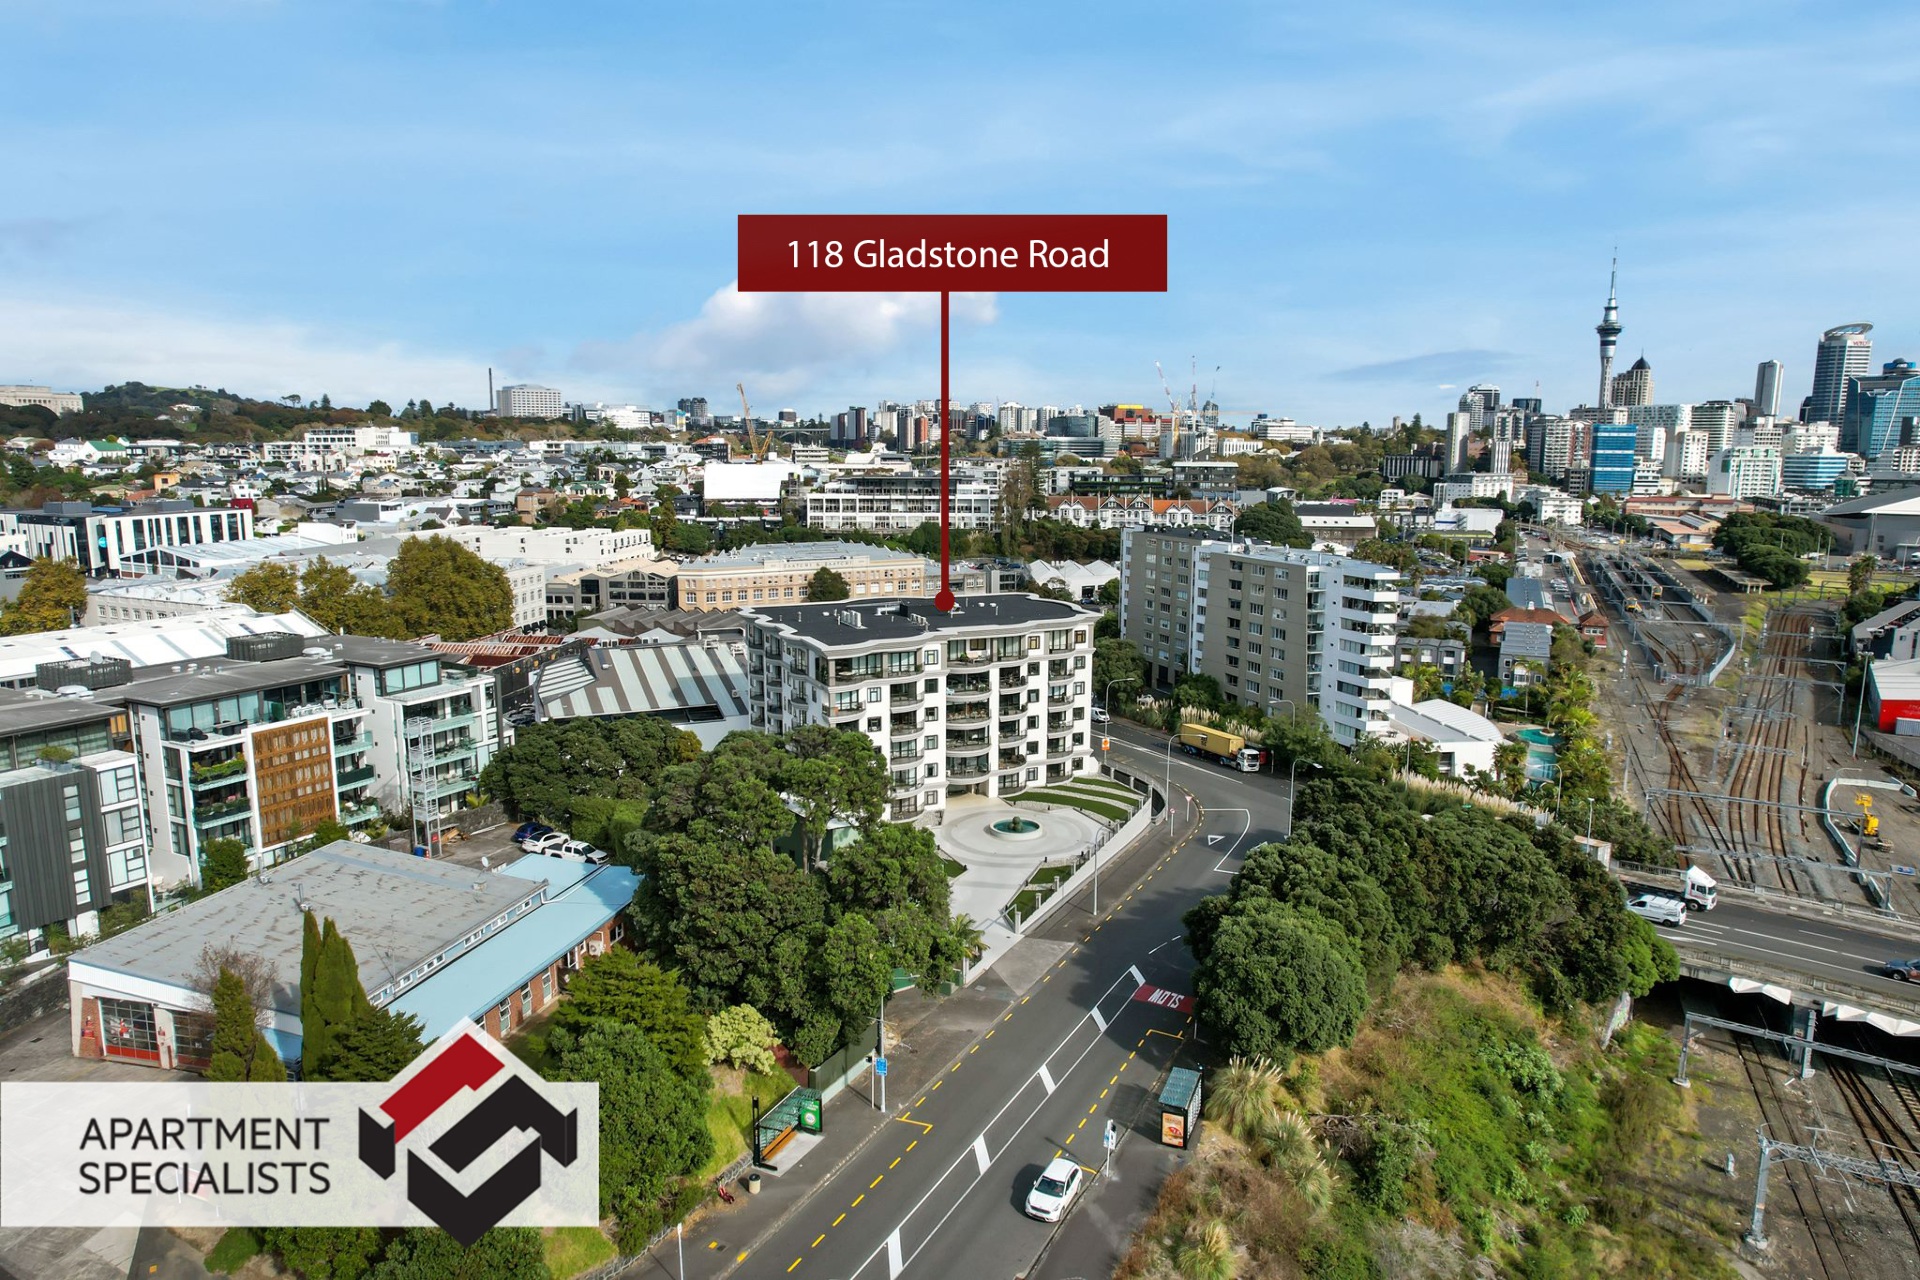 20 | 118 Gladstone Road, Parnell | Apartment Specialists